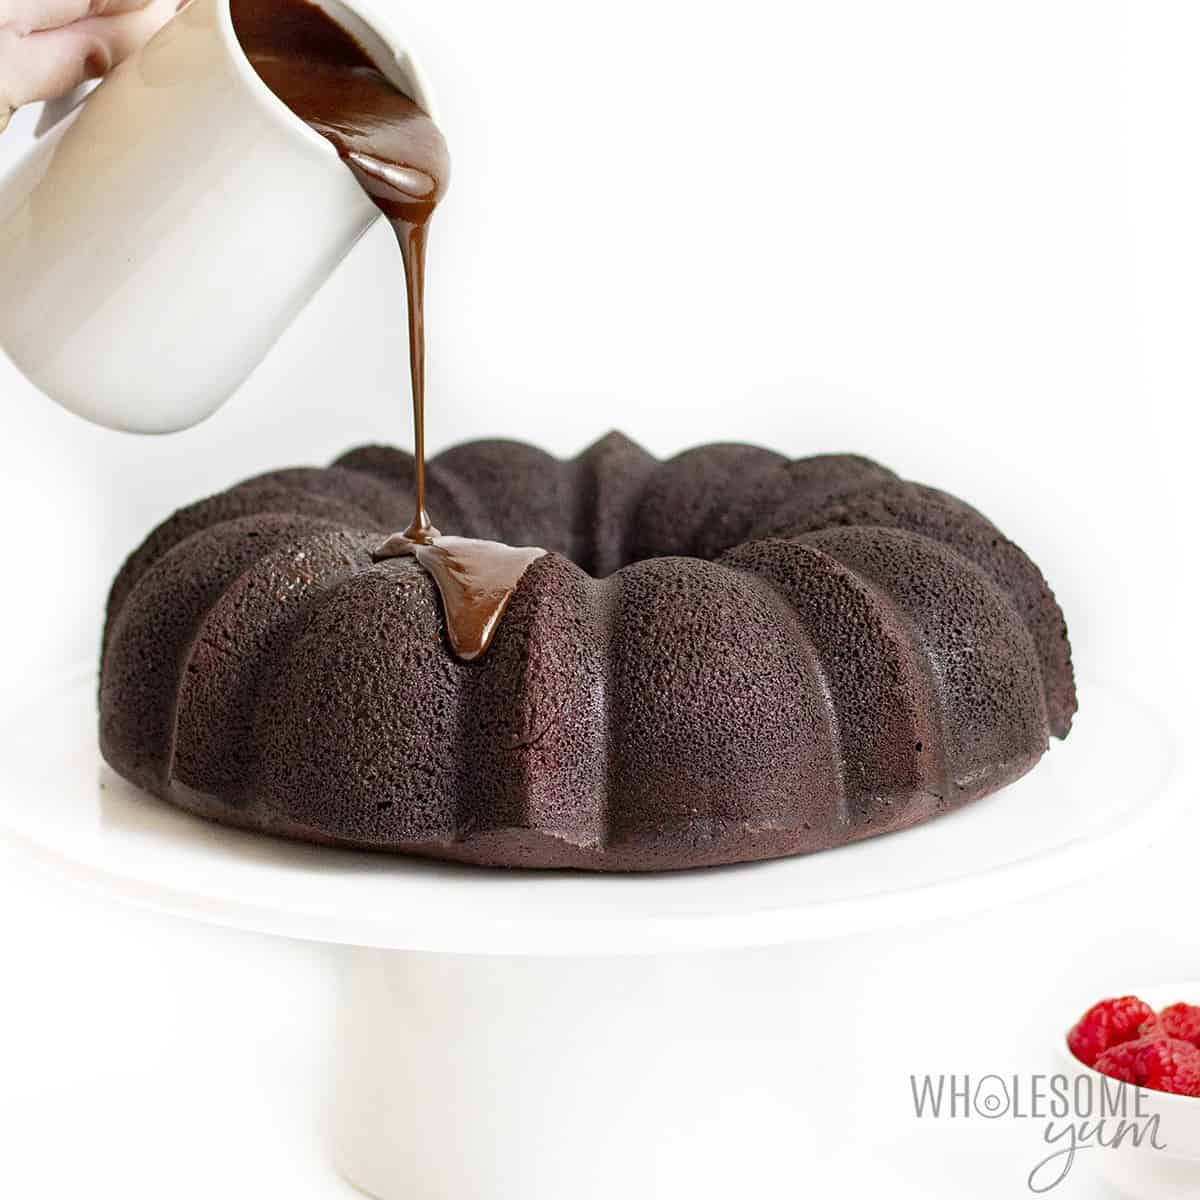 Chocolate icing for bundt cake pouring onto whole cake